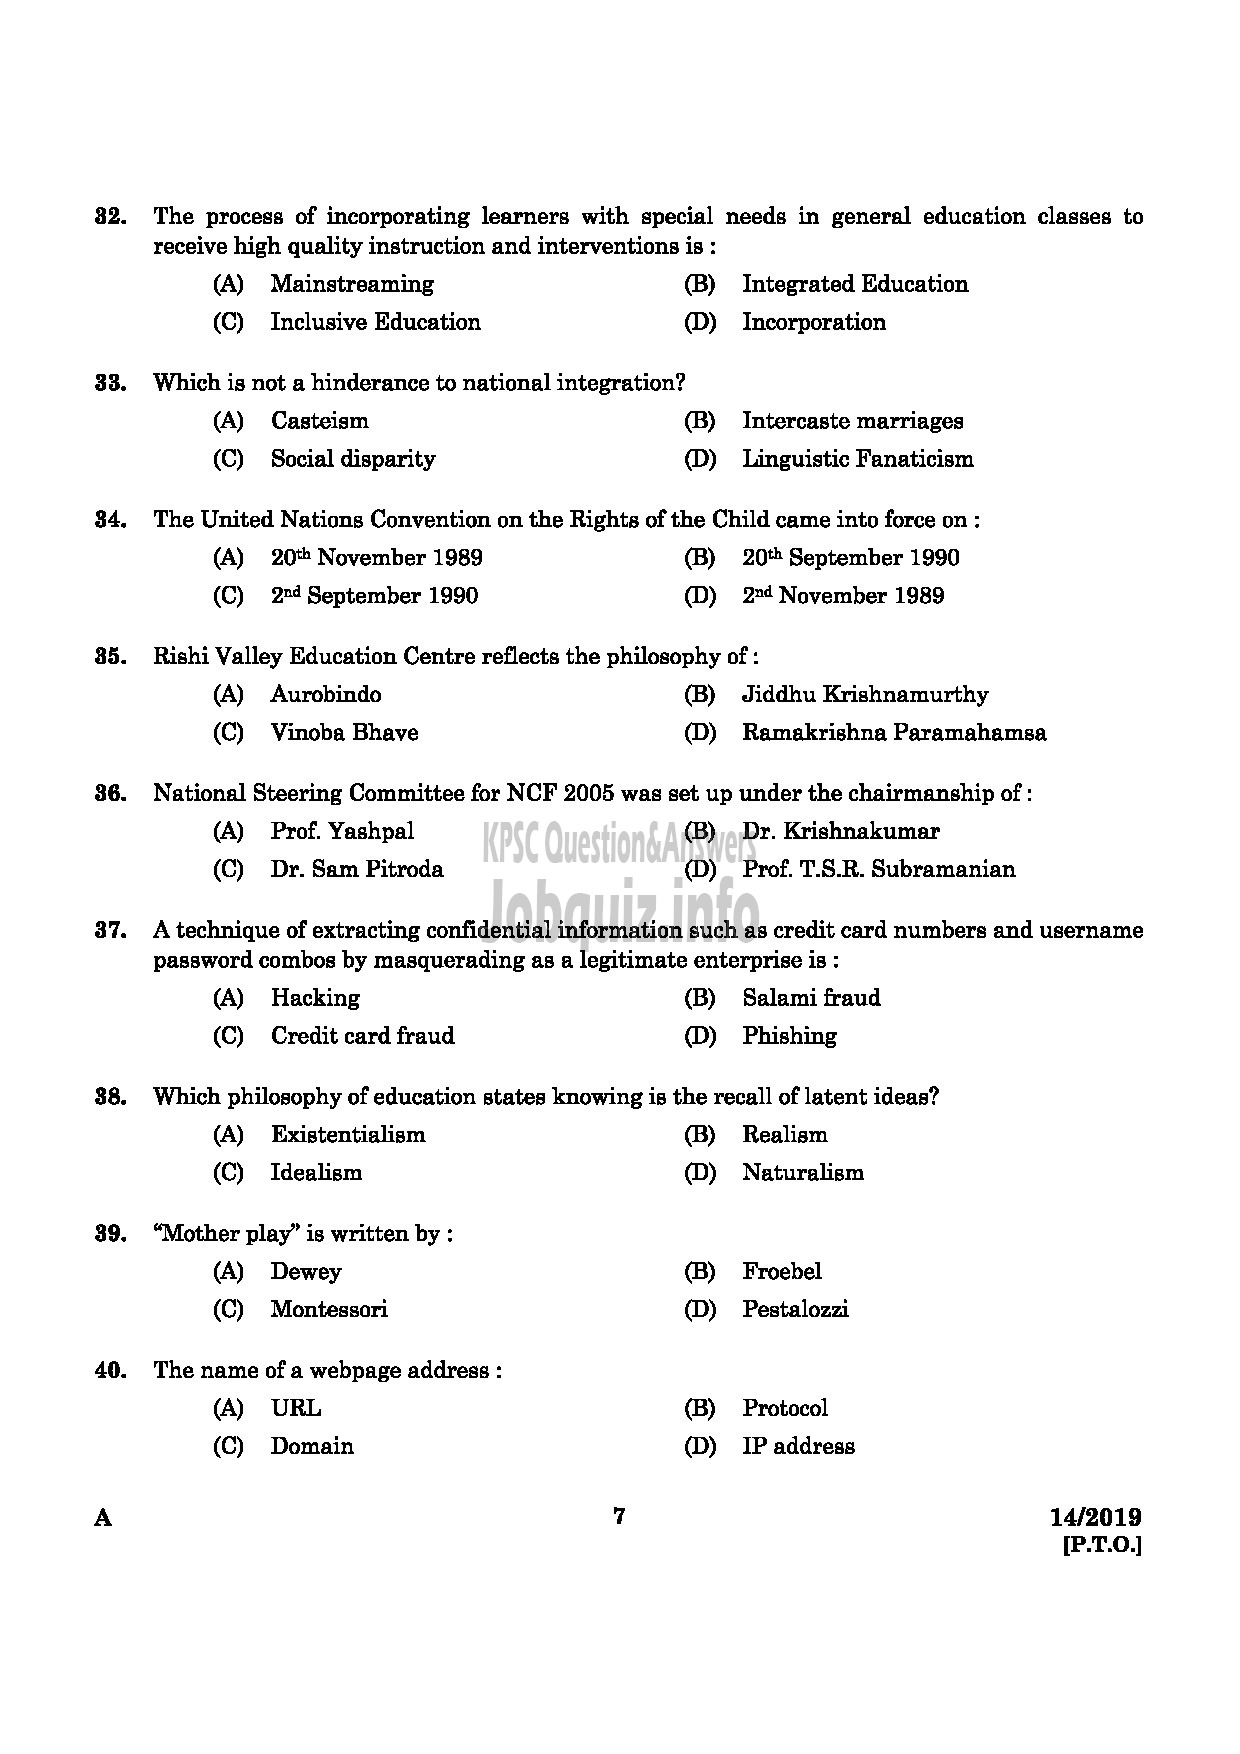 Kerala PSC Question Paper - SPECIAL TEACHER HOME FOR MENTALLY DEFICIENT CHILDREN SOCIAL JUSTICE DEPARTMENT-5